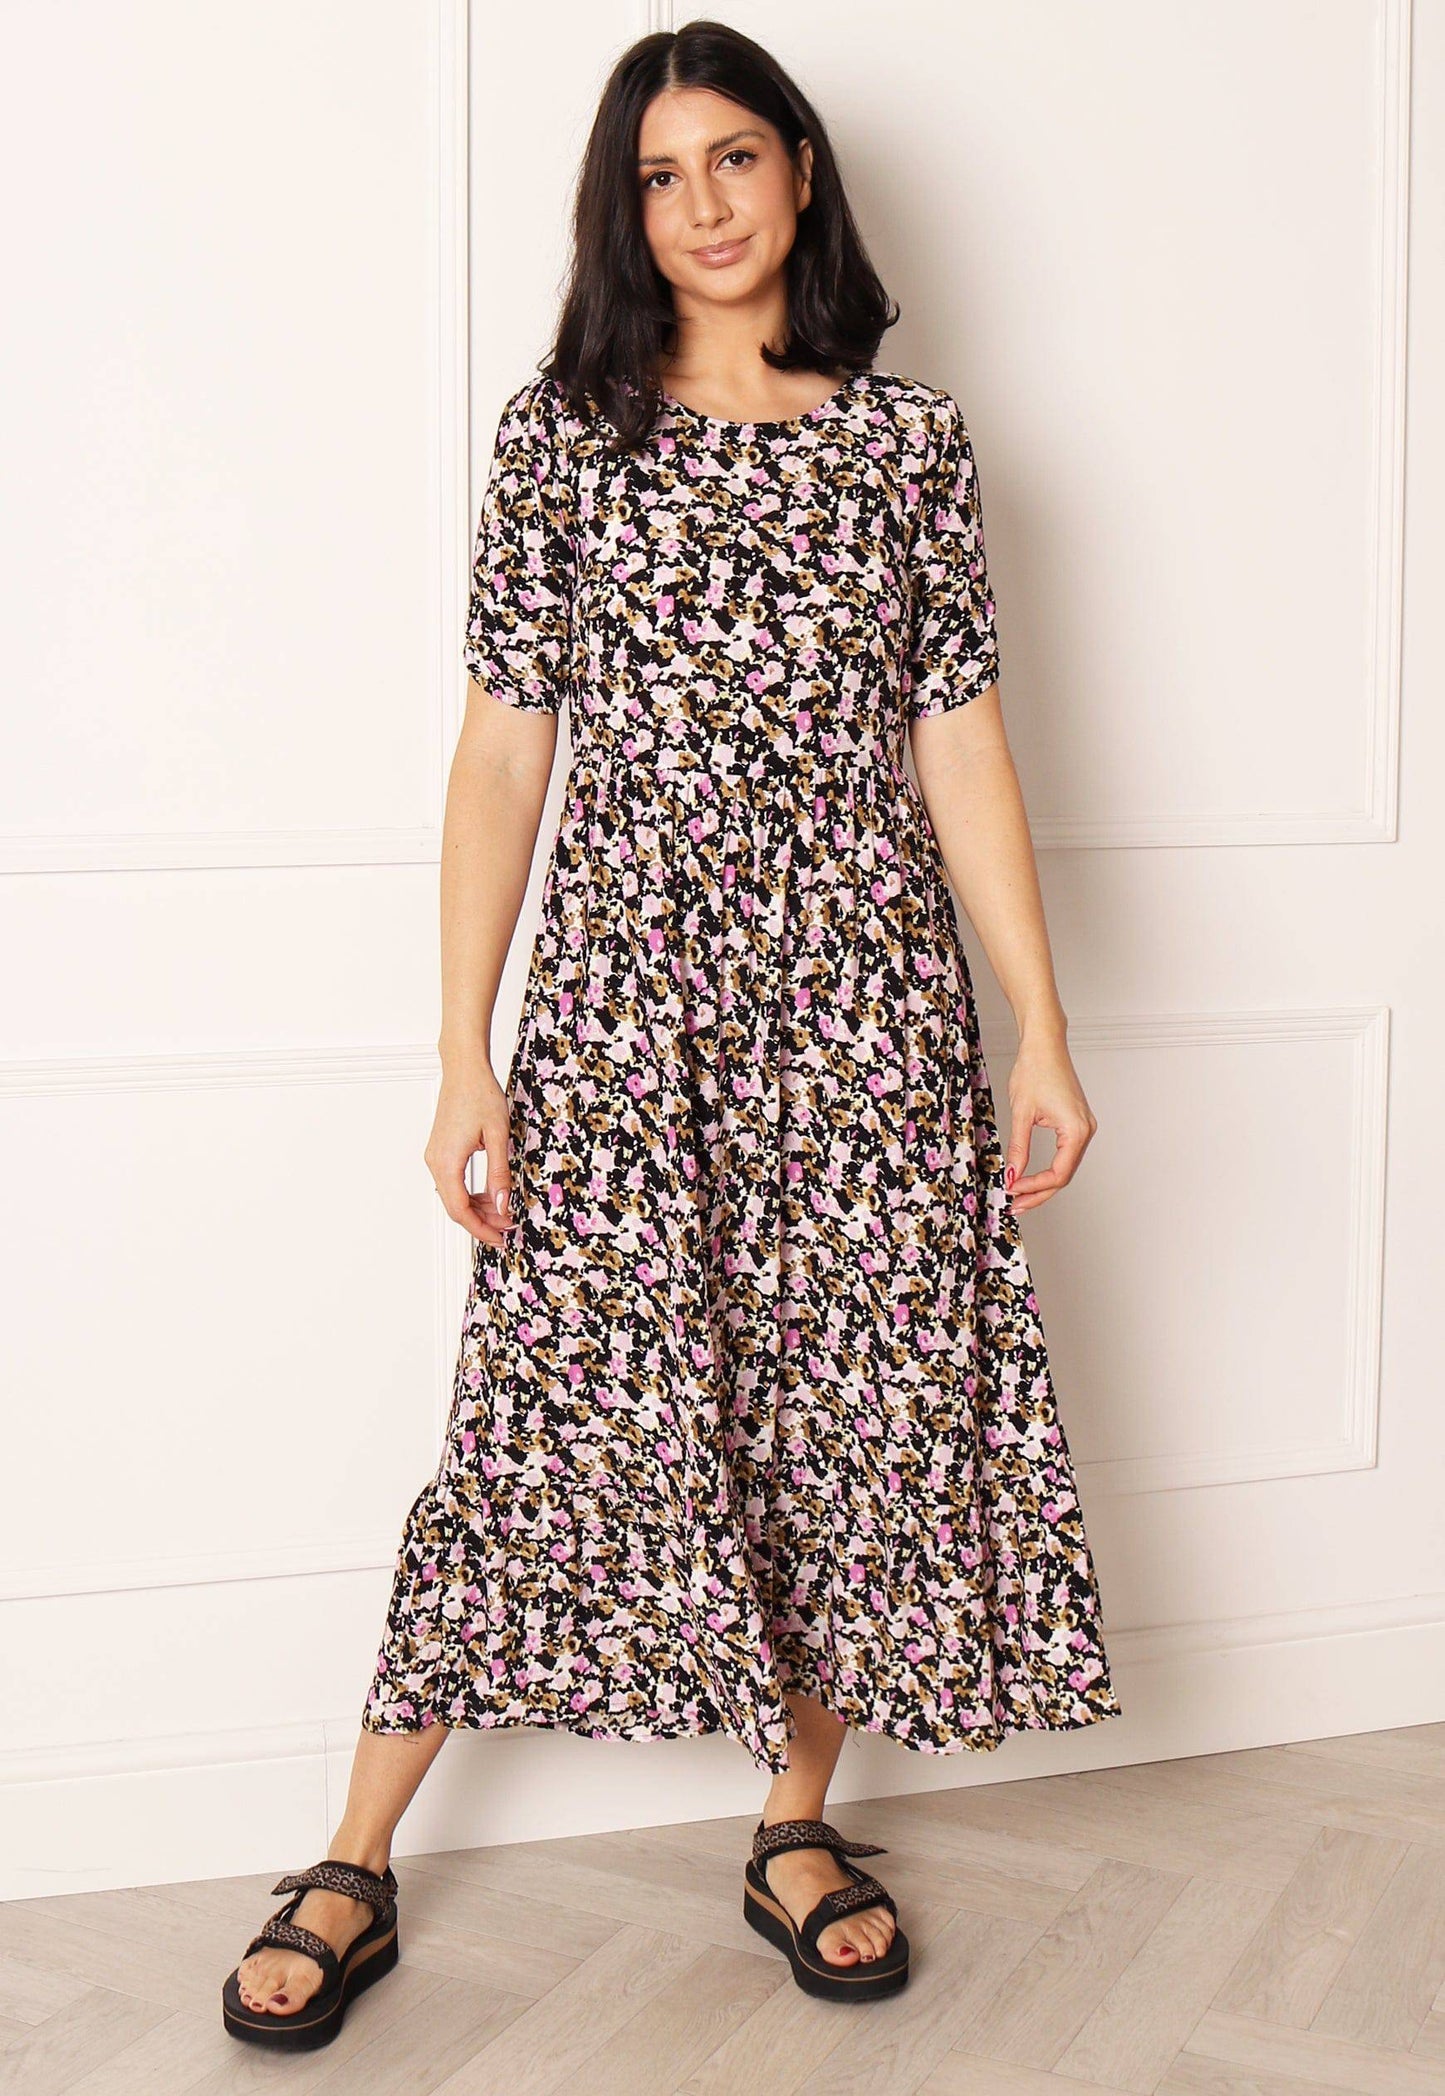 ONLY Roxy Floral Smock Midi Dress in Black & Pink - One Nation Clothing